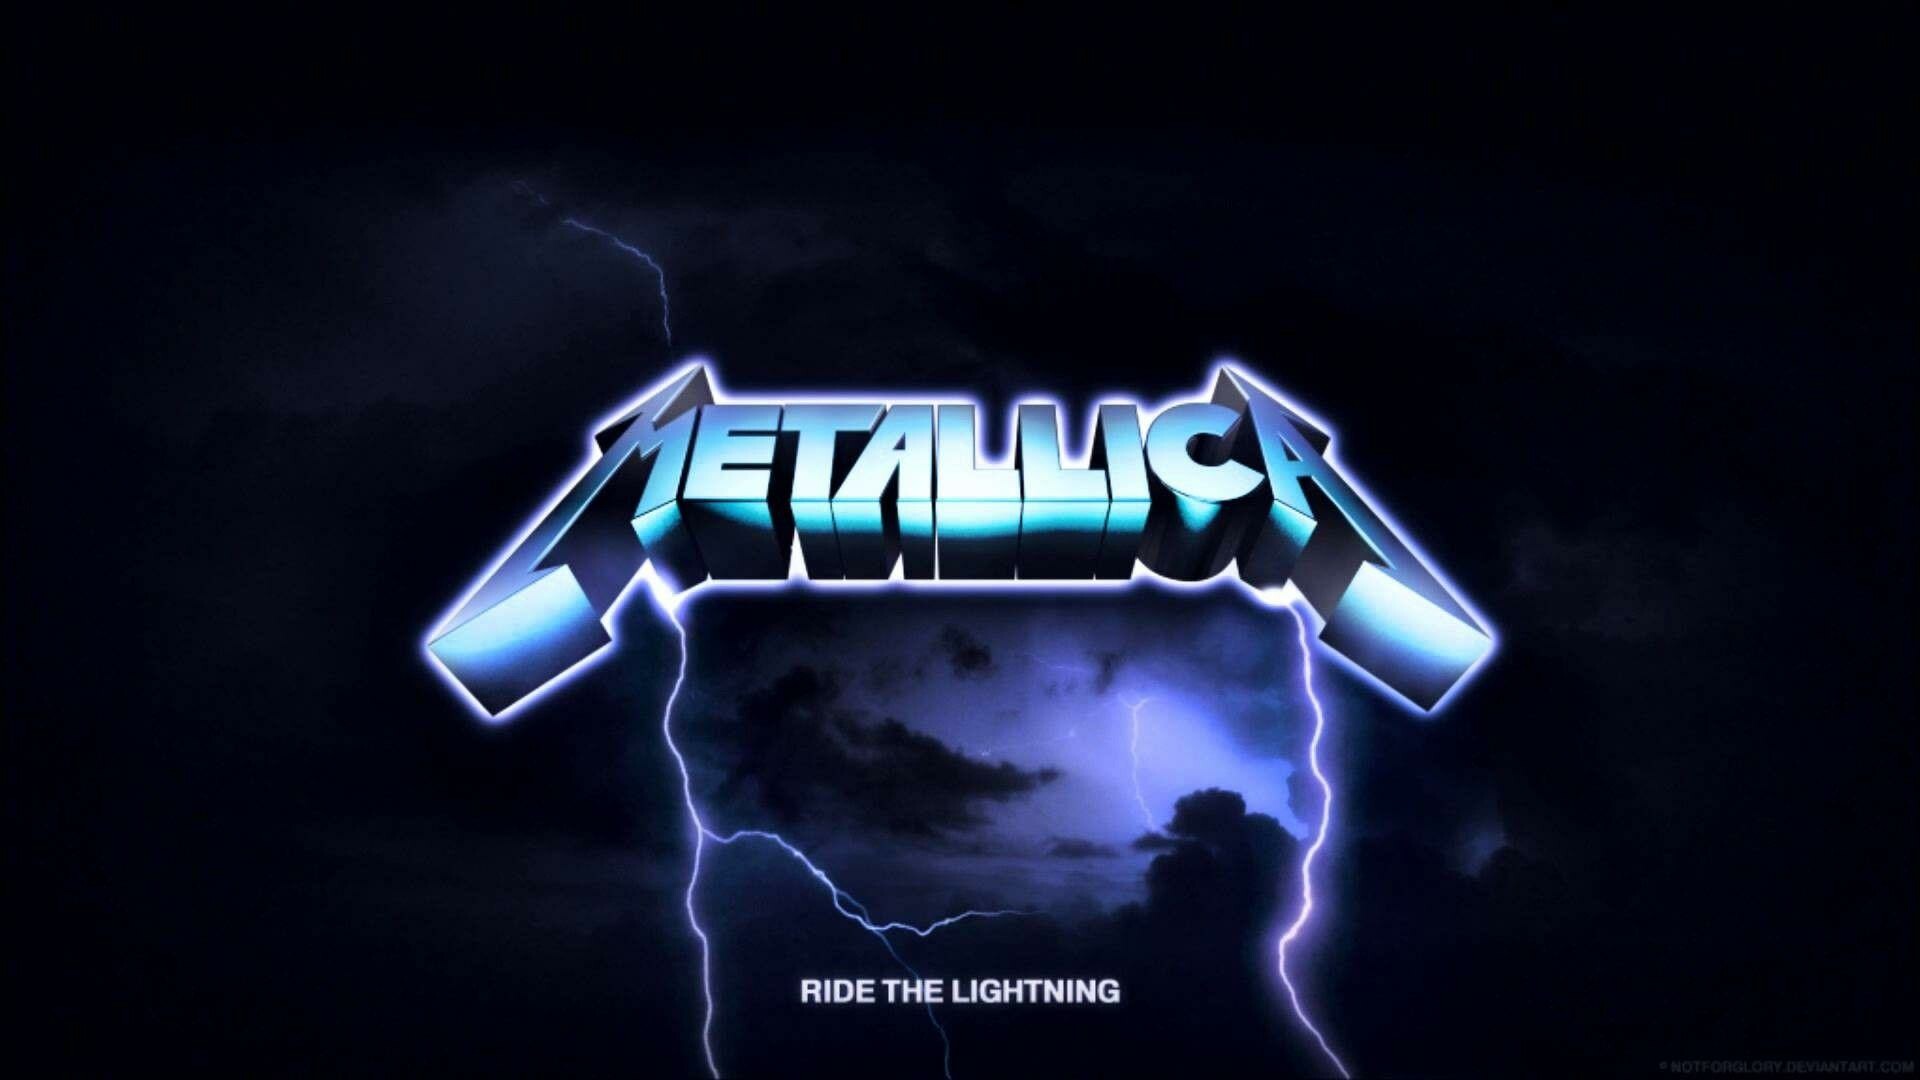 Metallica: Ride the Lightning, The second studio album by American heavy metal band, Released on July 27, 1984. 1920x1080 Full HD Wallpaper.